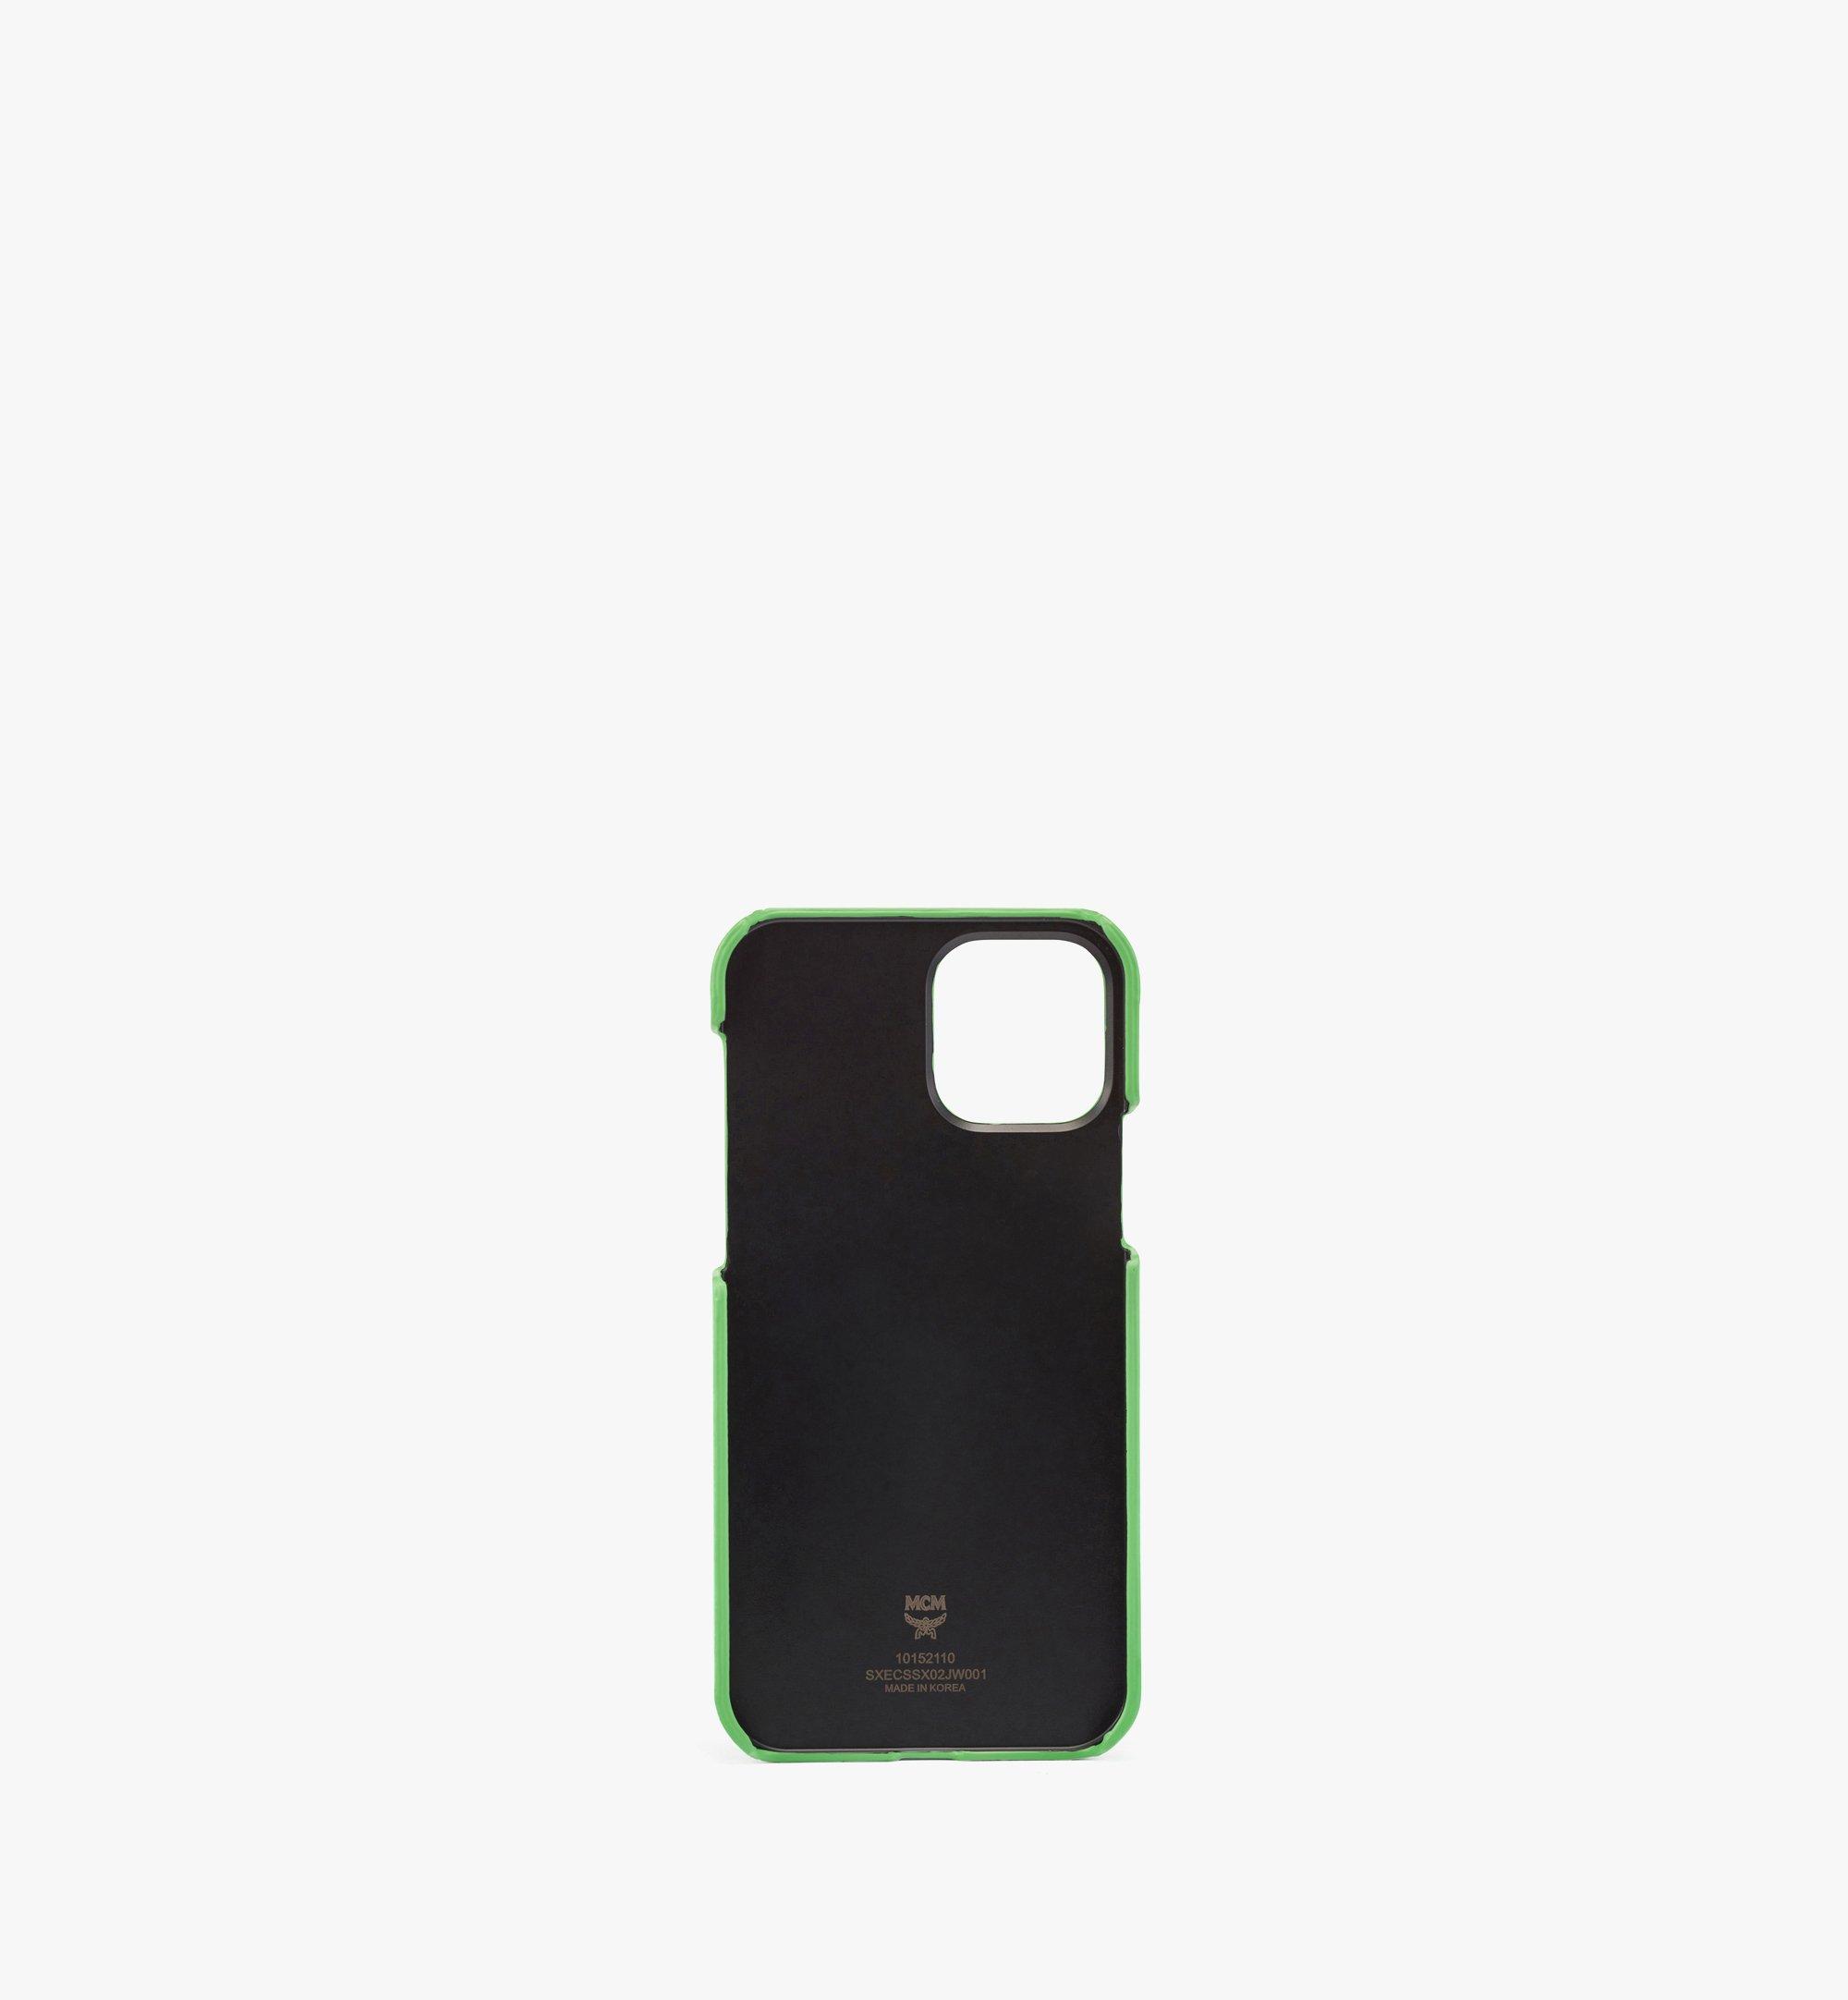 MCM iPhone 12/12 Pro Case w/ Chain Handle and Card Slot Green MXECSSX02JW001 Alternate View 1